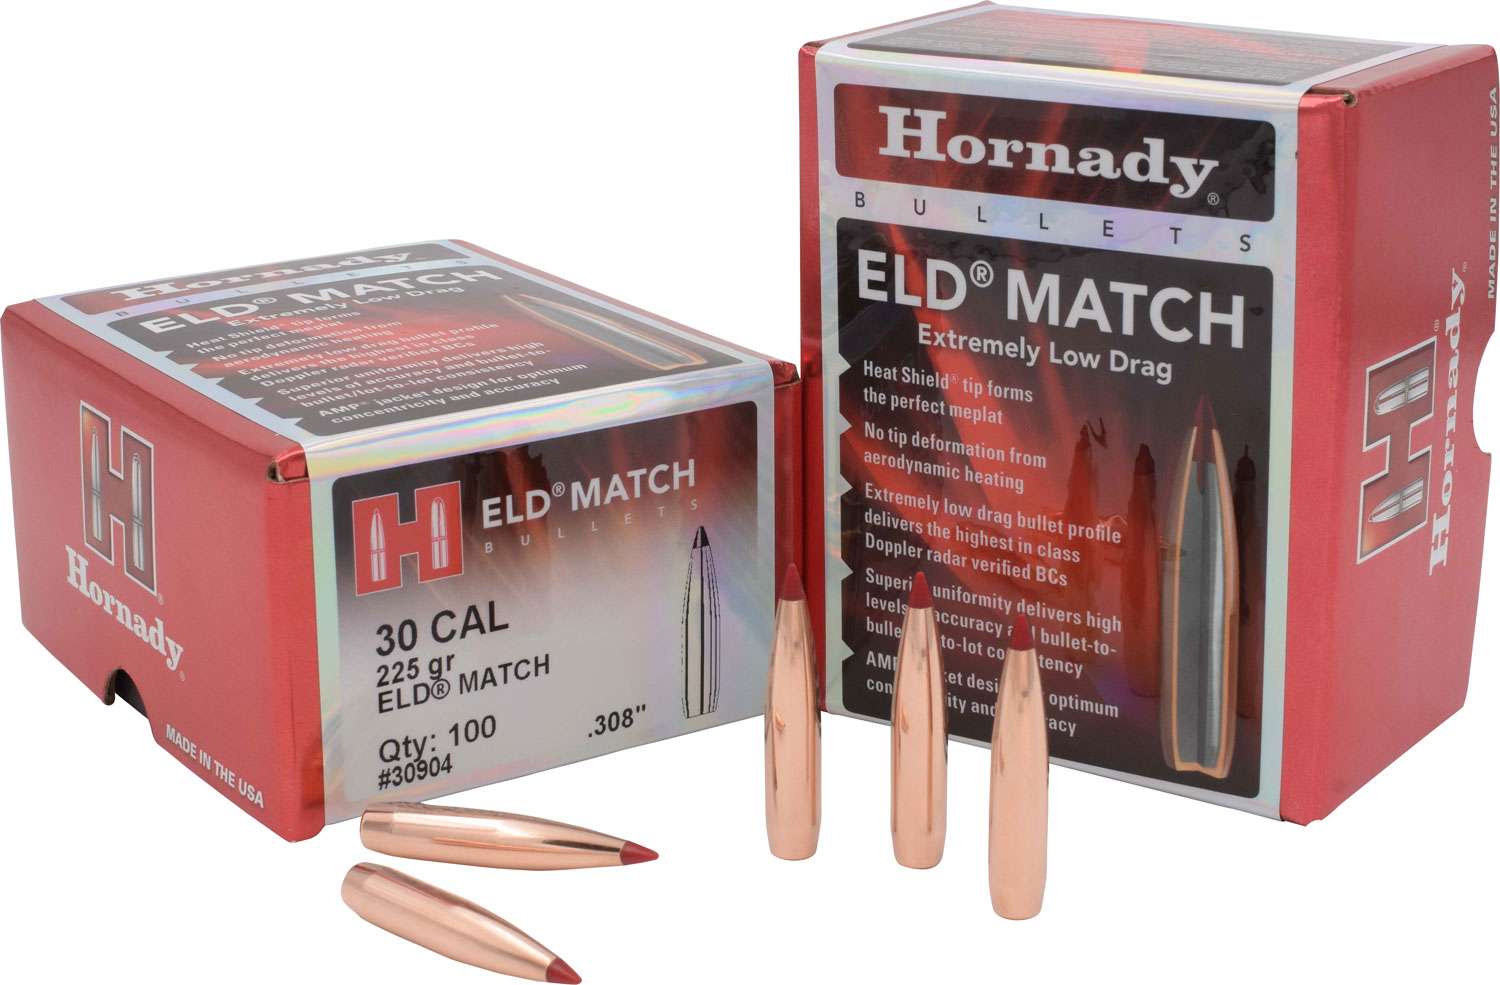 Hornady ELD Match 30 Cal .308 225 gr Extremely Low Drag-Match 100 Per Box-img-1